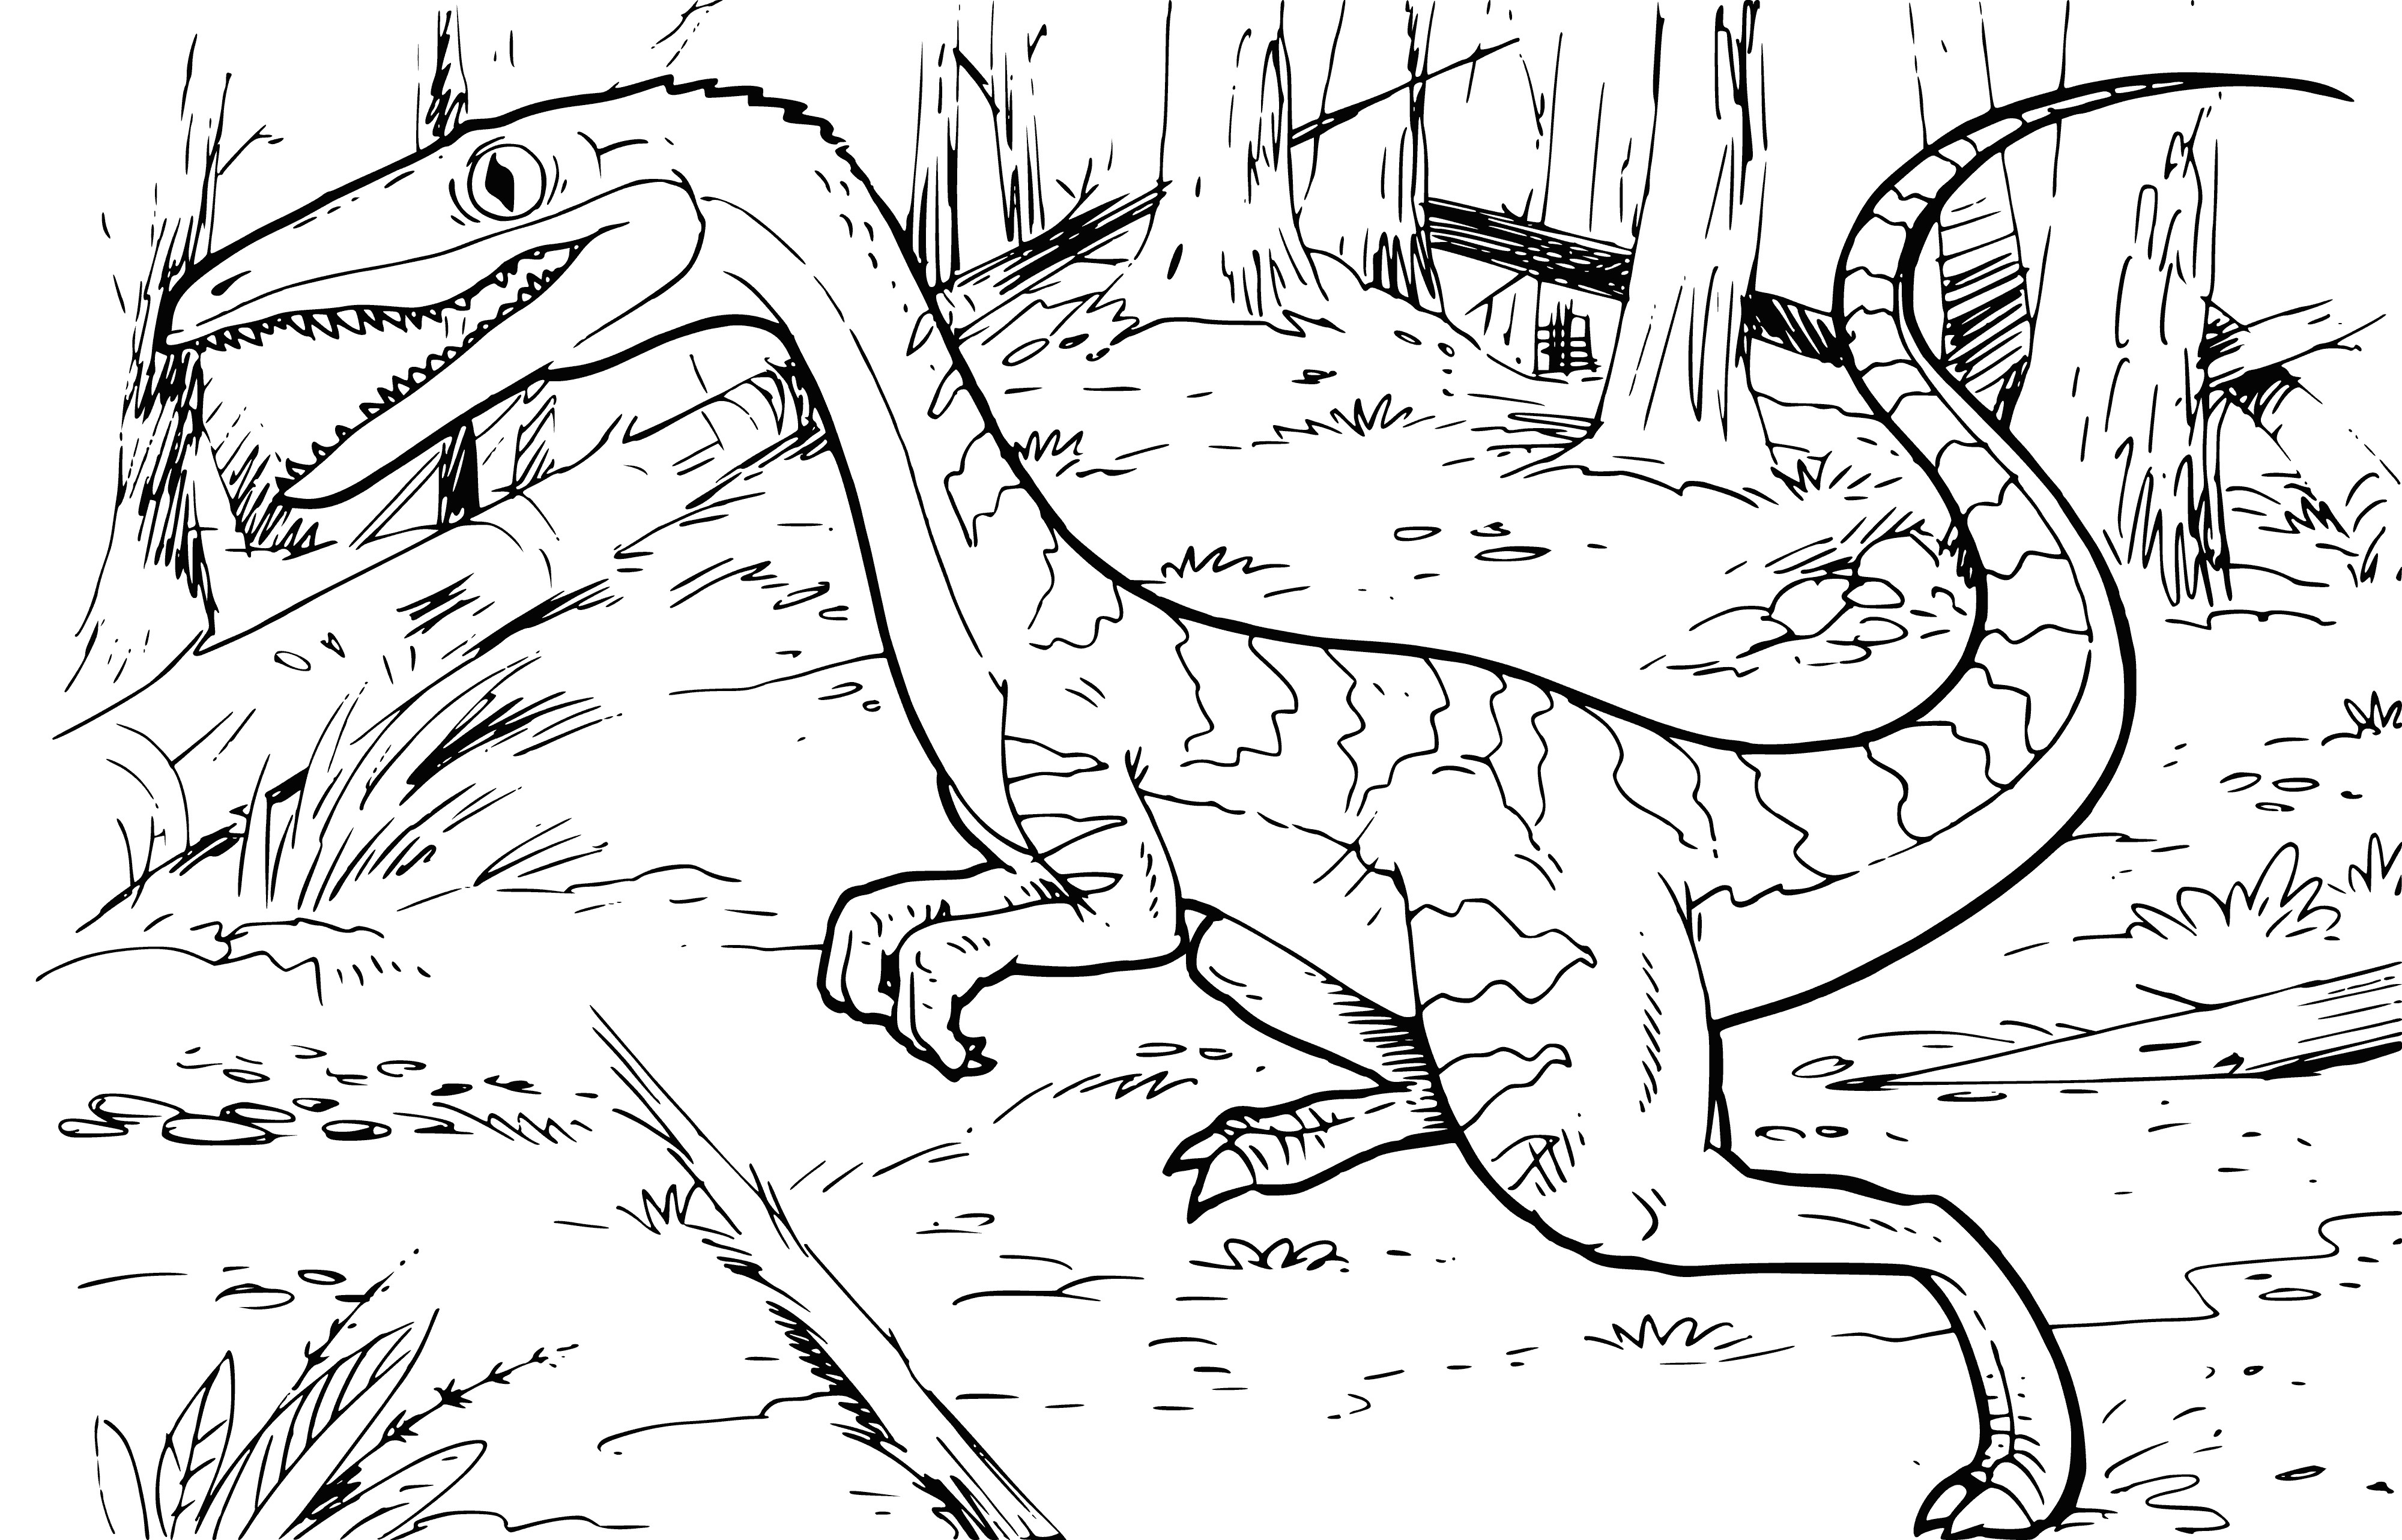 coloring page: Color a small plant-eating dinosaur from the Triassic period with a long neck and tail, beak-like mouth, short legs, and clawed fingers/toes. #DinosaurColoringPage